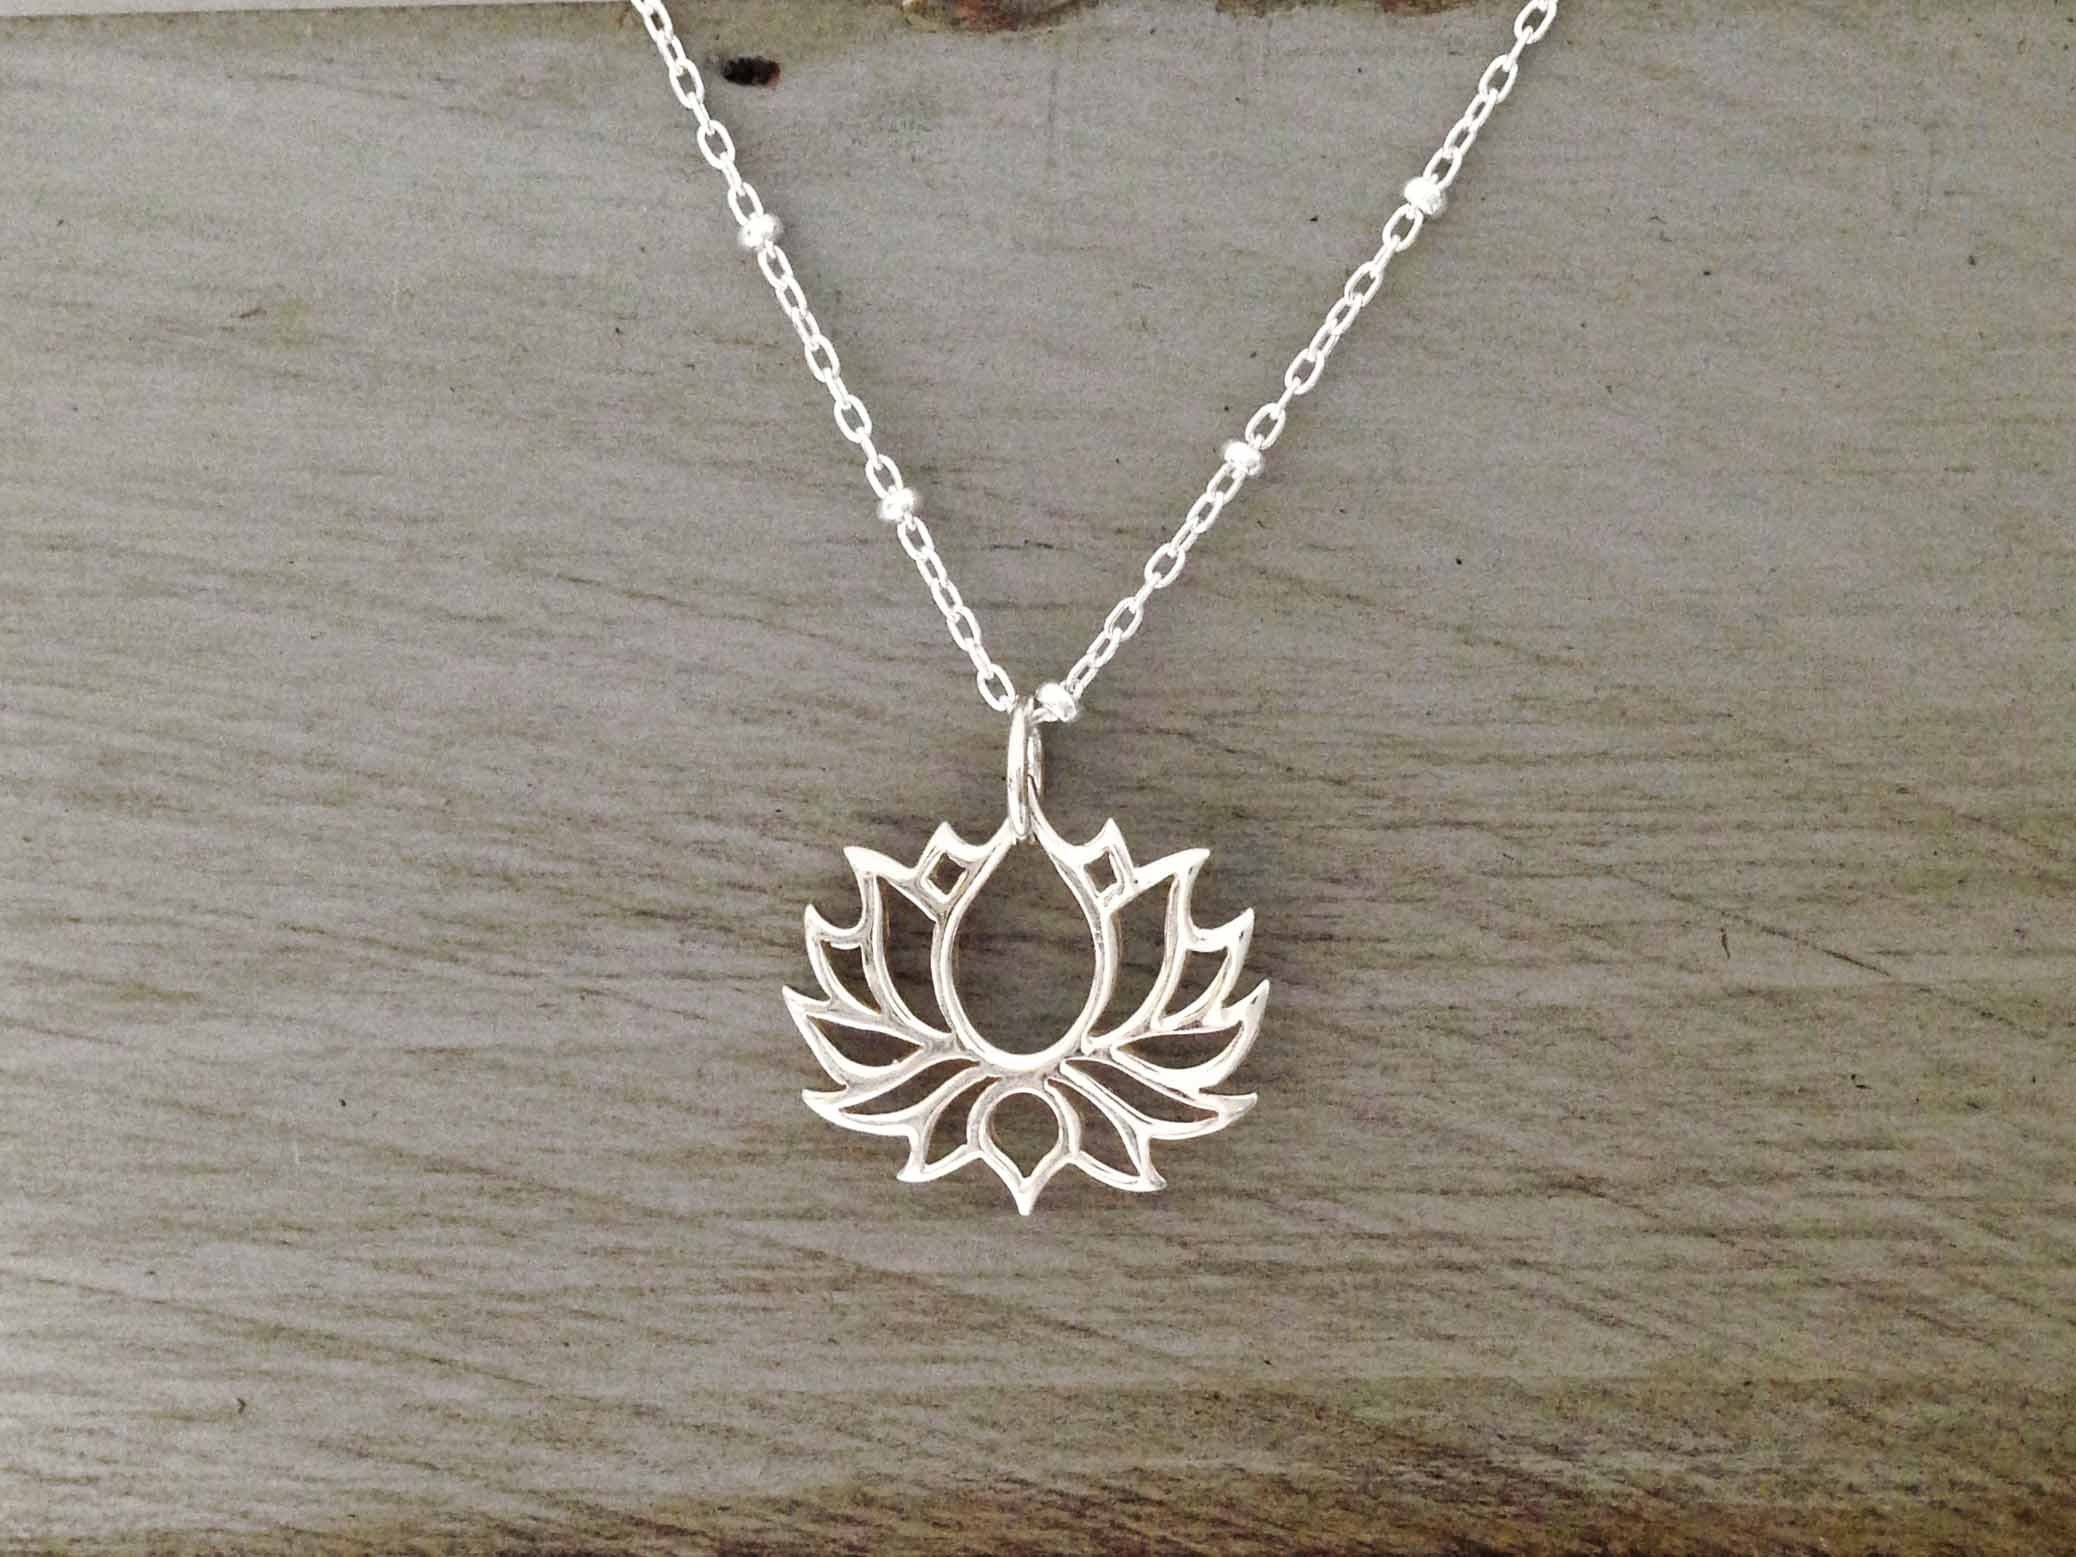 Sterling Silver Blooming Lotus Necklace Yoga jewelry lotus | Etsy